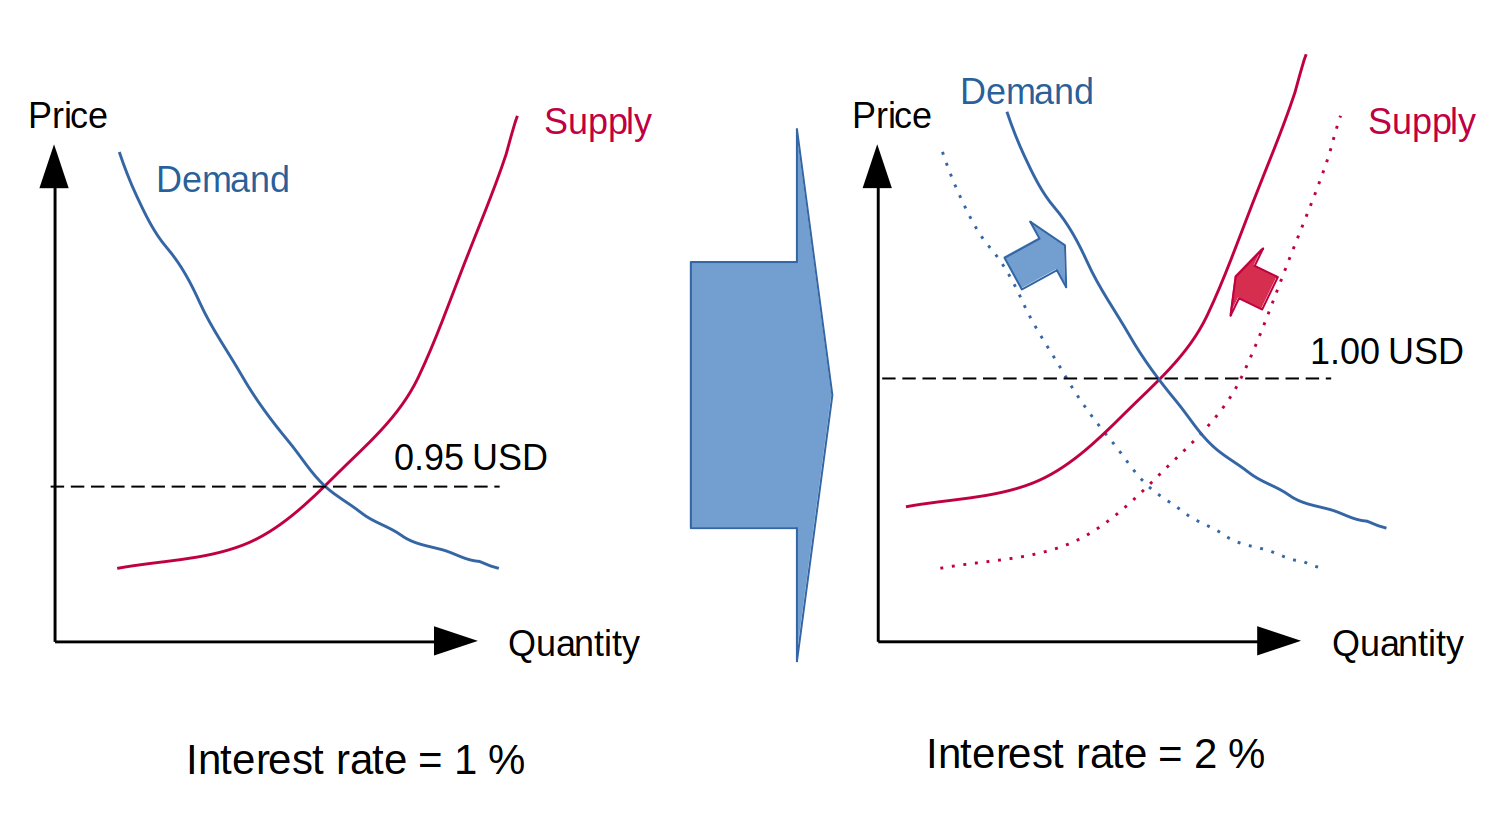 Supply and demand change with interest rate